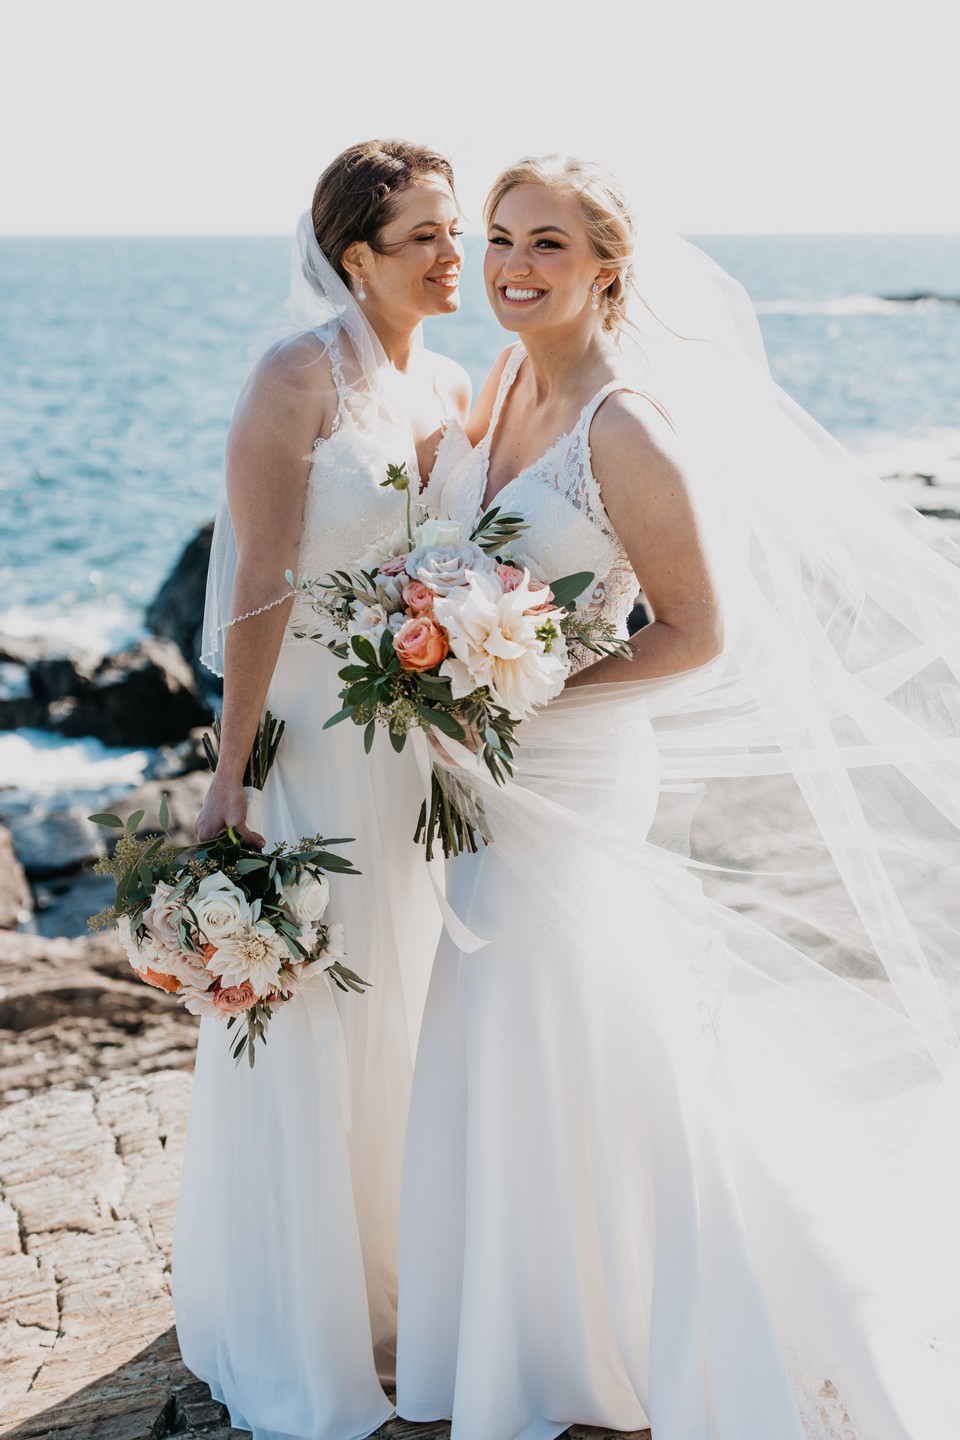 two brides wearing wedding dresses smiling on their wedding day by the ocean